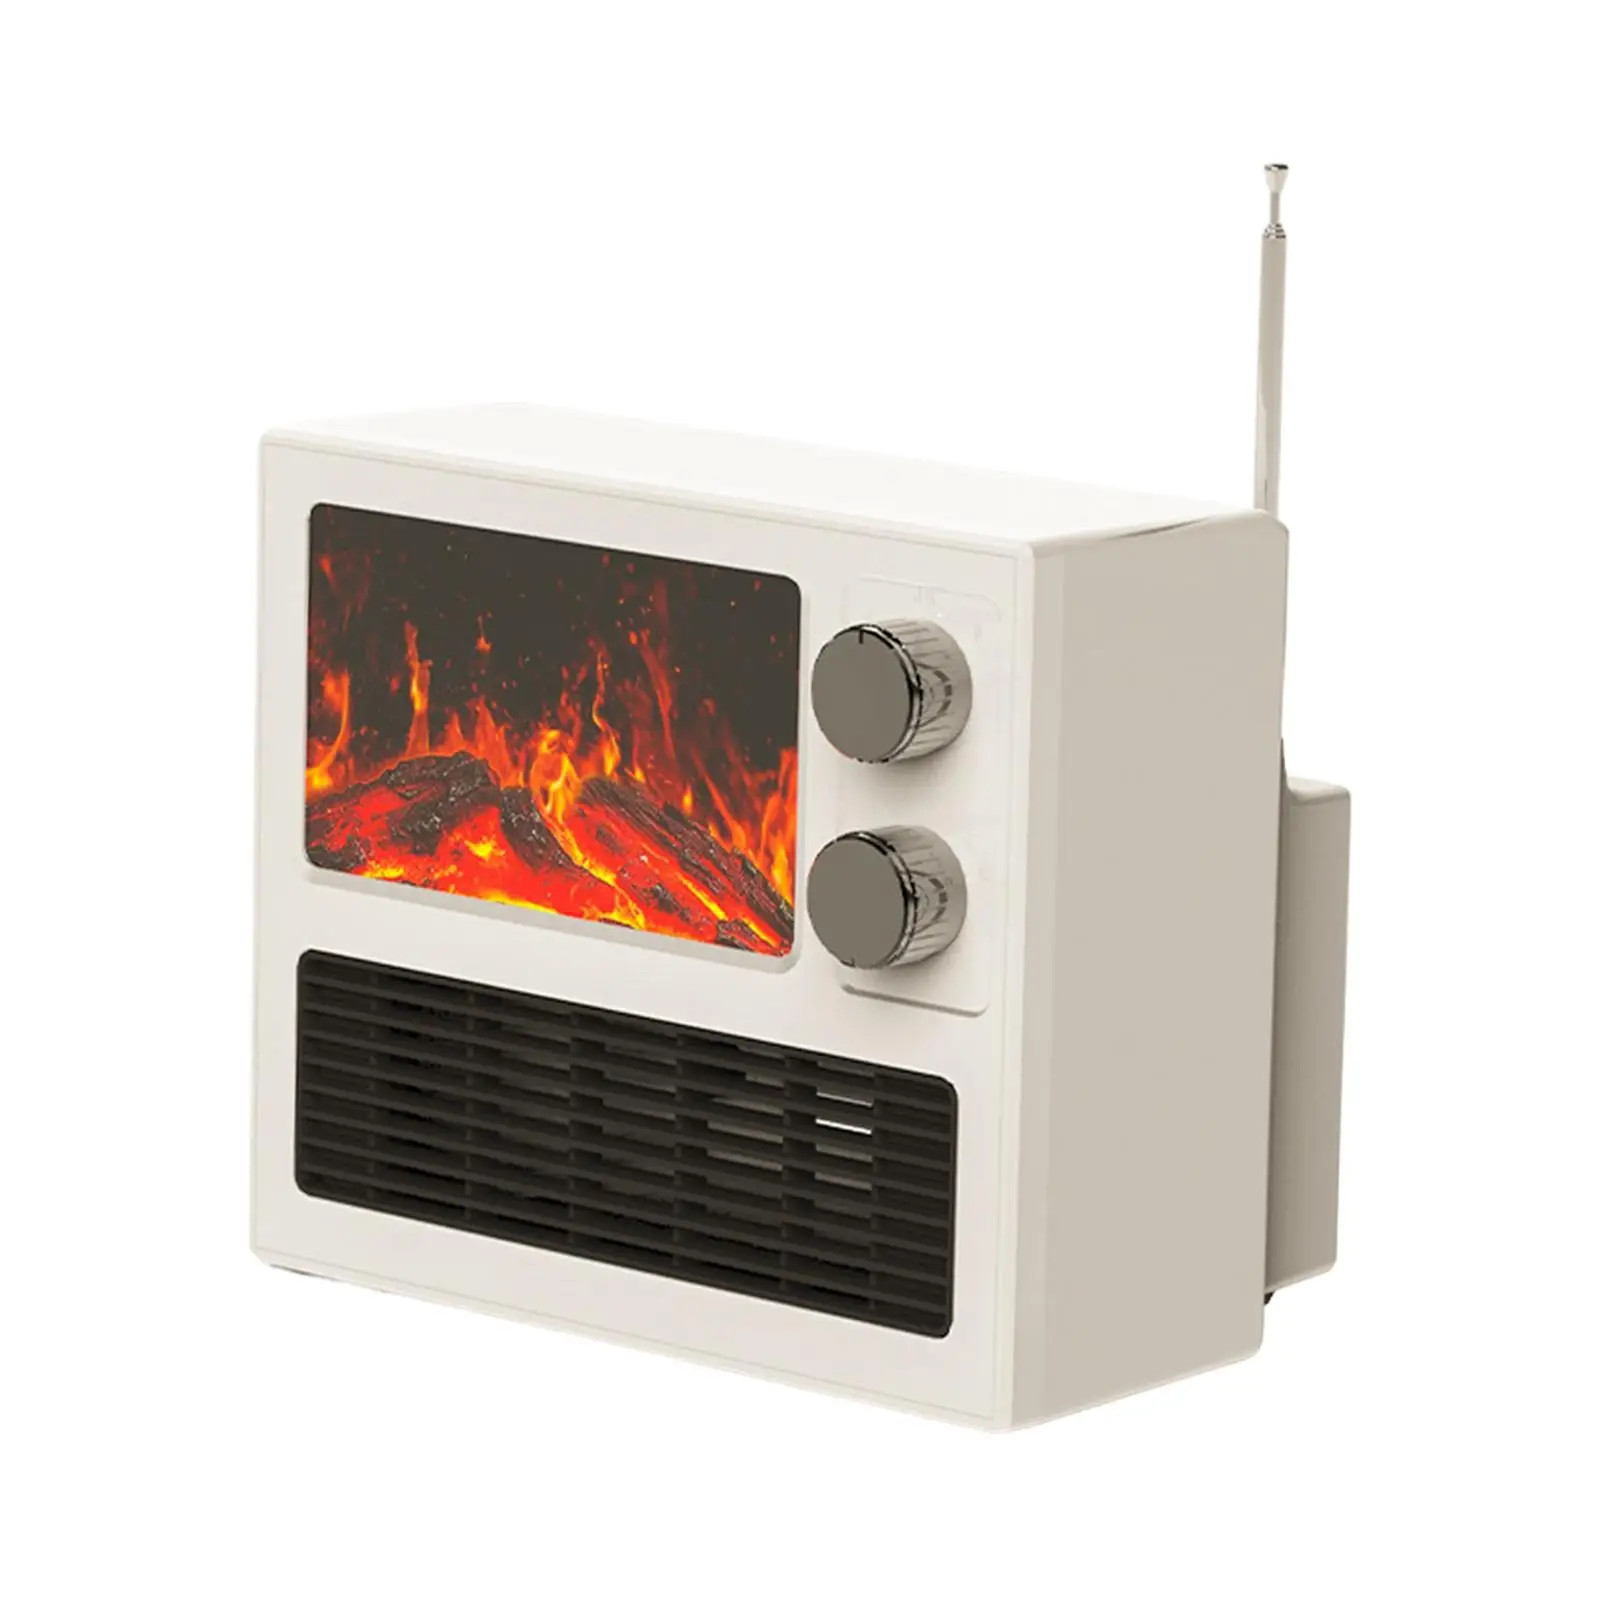 Small Electric Fireplace Freestanding Quiet with Flame Effect 1000W Space Heater for Office Dormitory Apartment Farmhouse Home